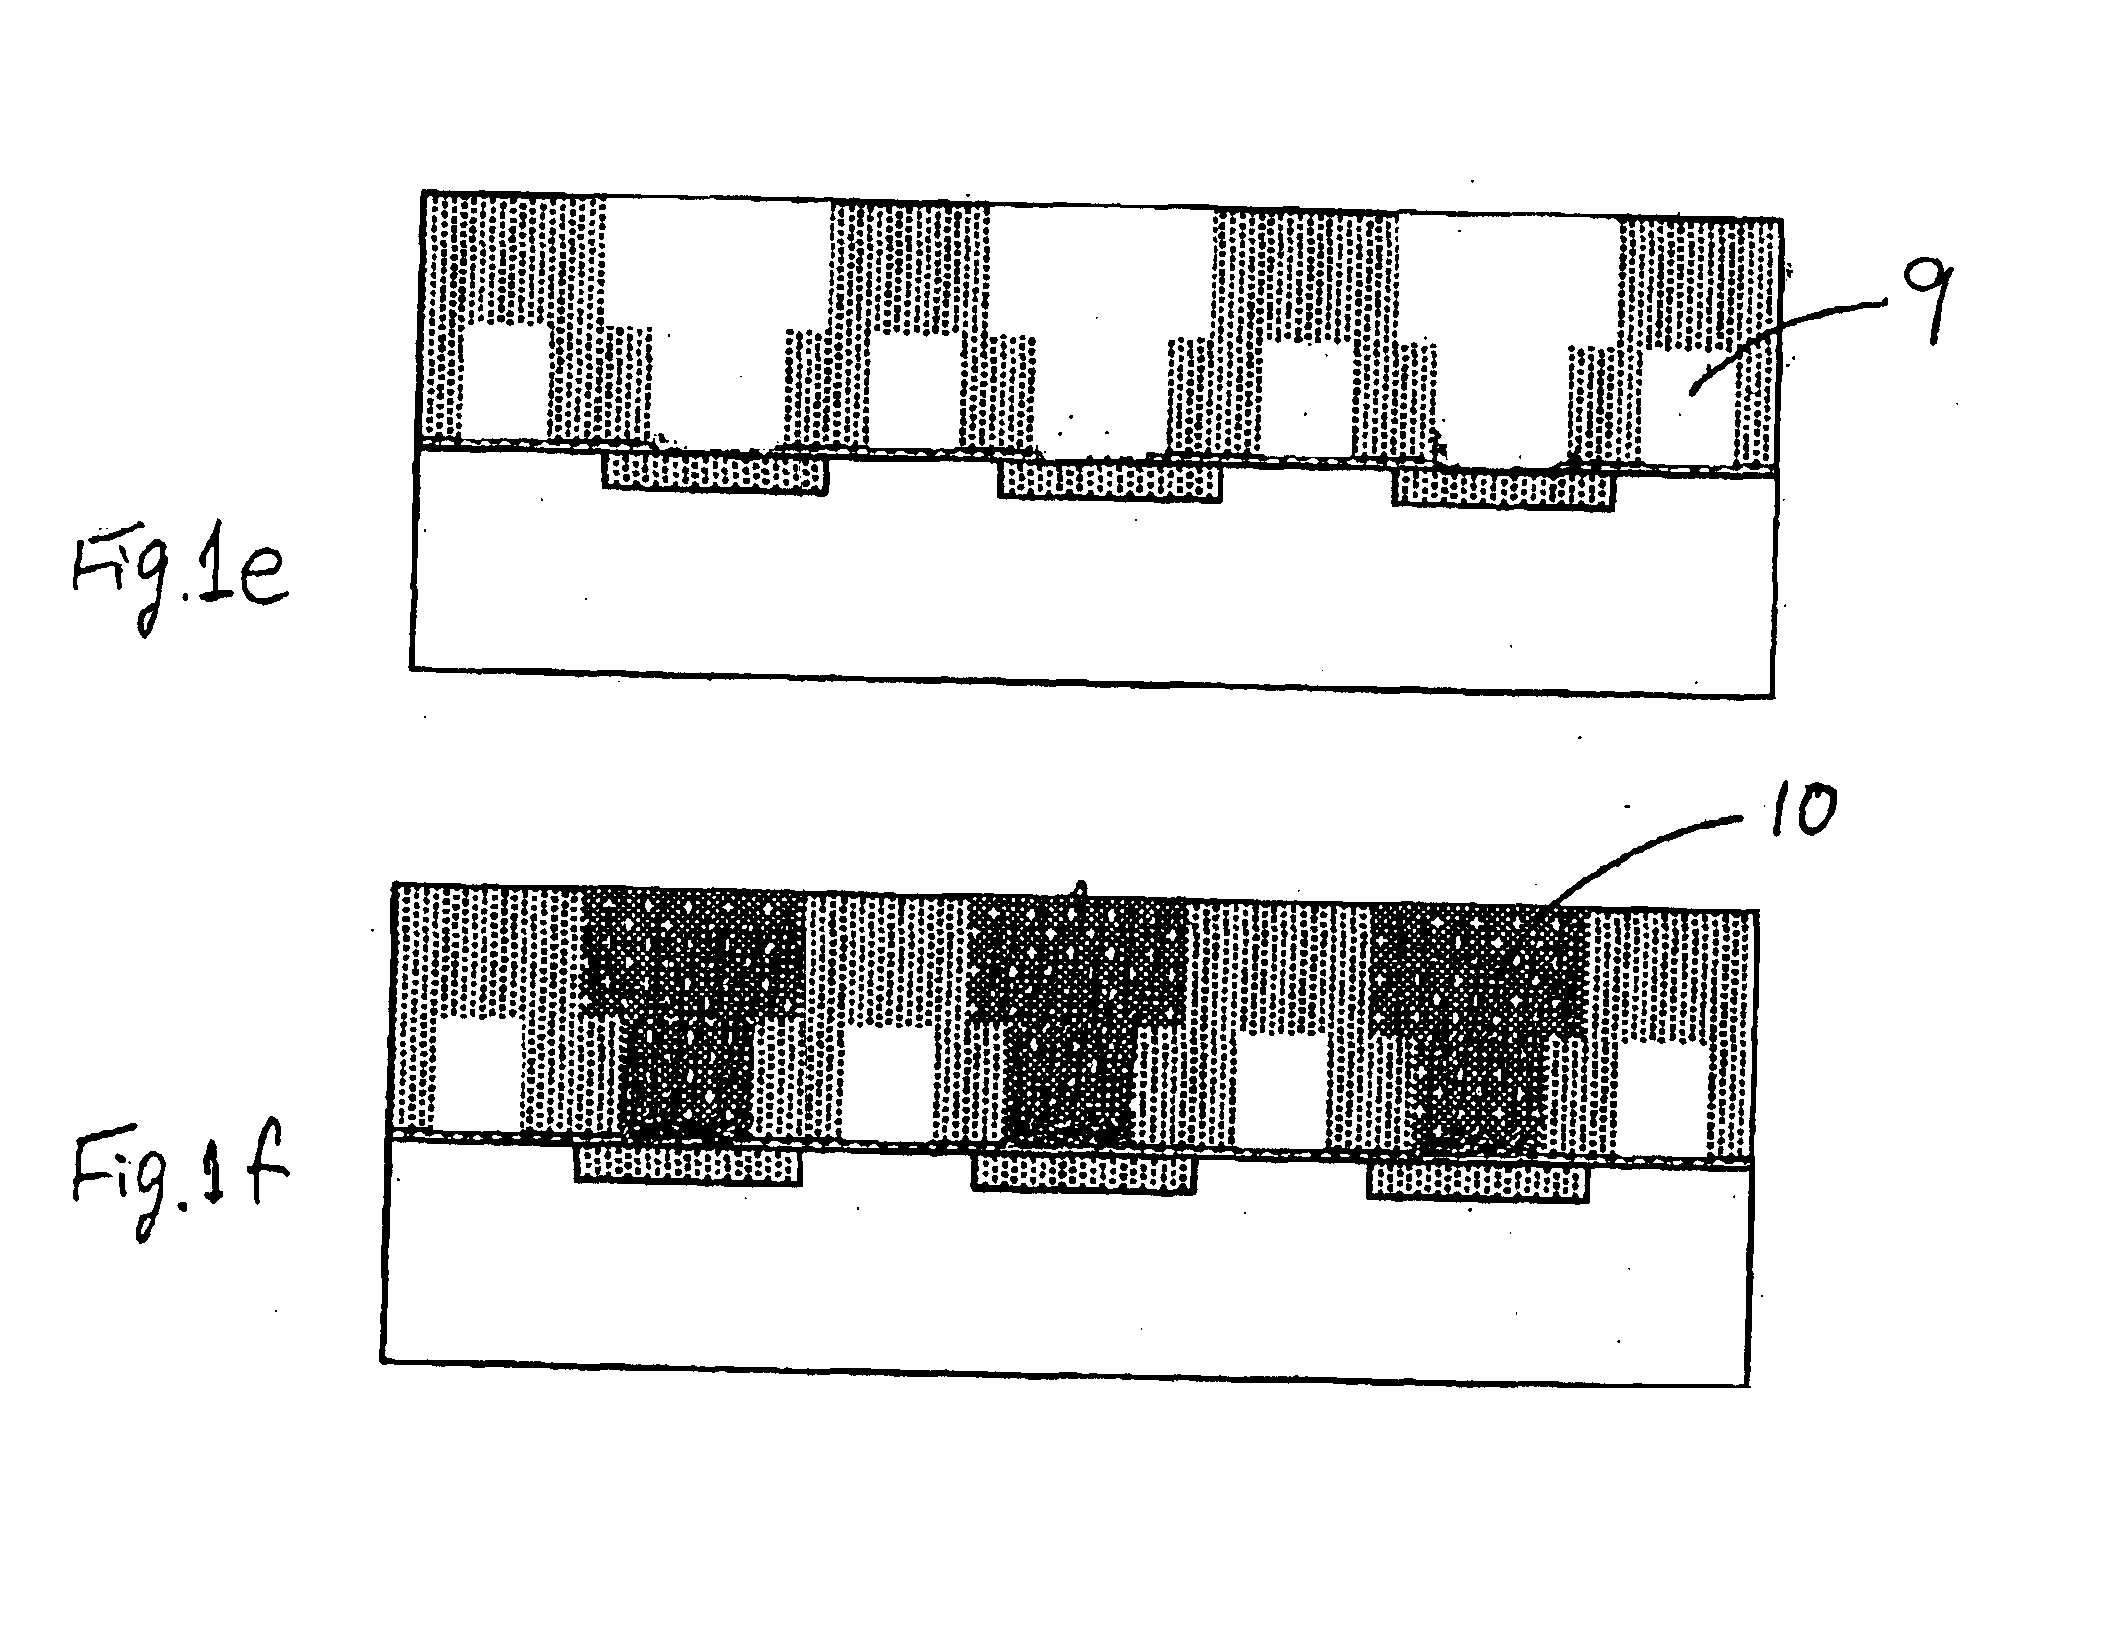 Method for manufacturing semiconductor device having porous structure with air-gaps